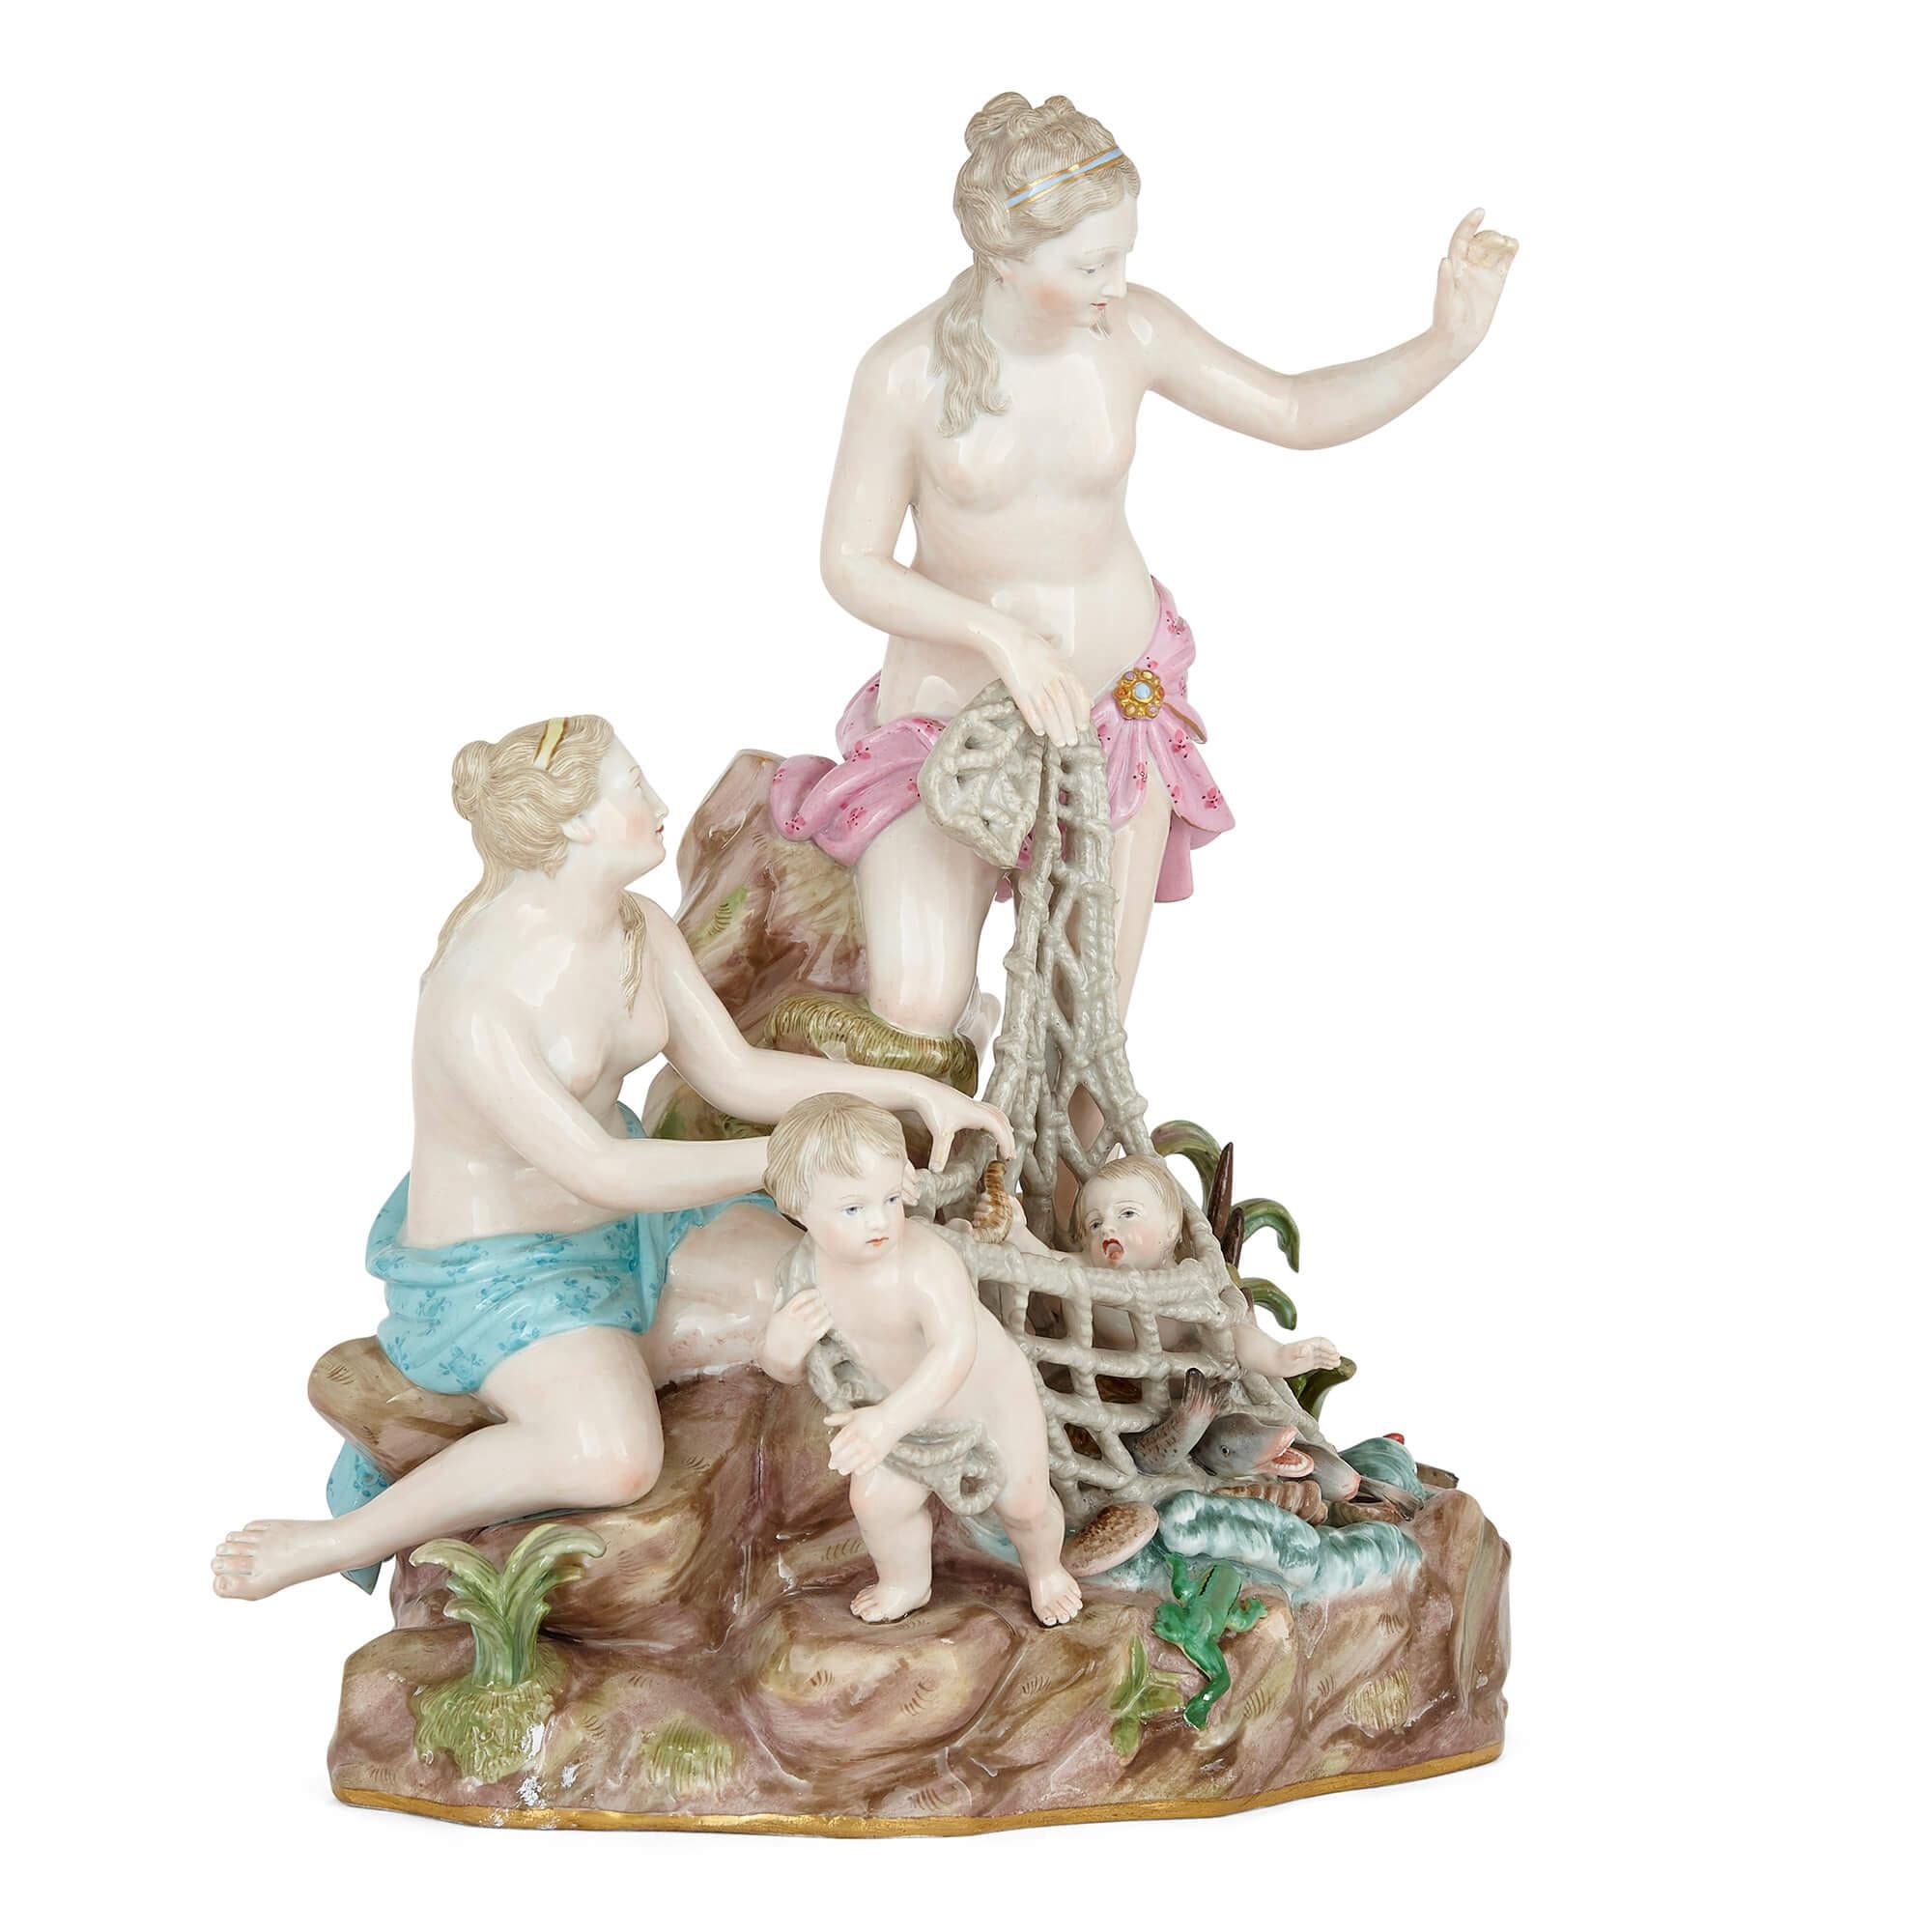 Porcelain mythological group of Triton by Meissen
German, 19th century
Measures: Height 31cm, width 27cm, depth 17cm

This large and impressive Meissen porcelain group depicts a mythological subject: two water nymphs, with the aid of a putto,